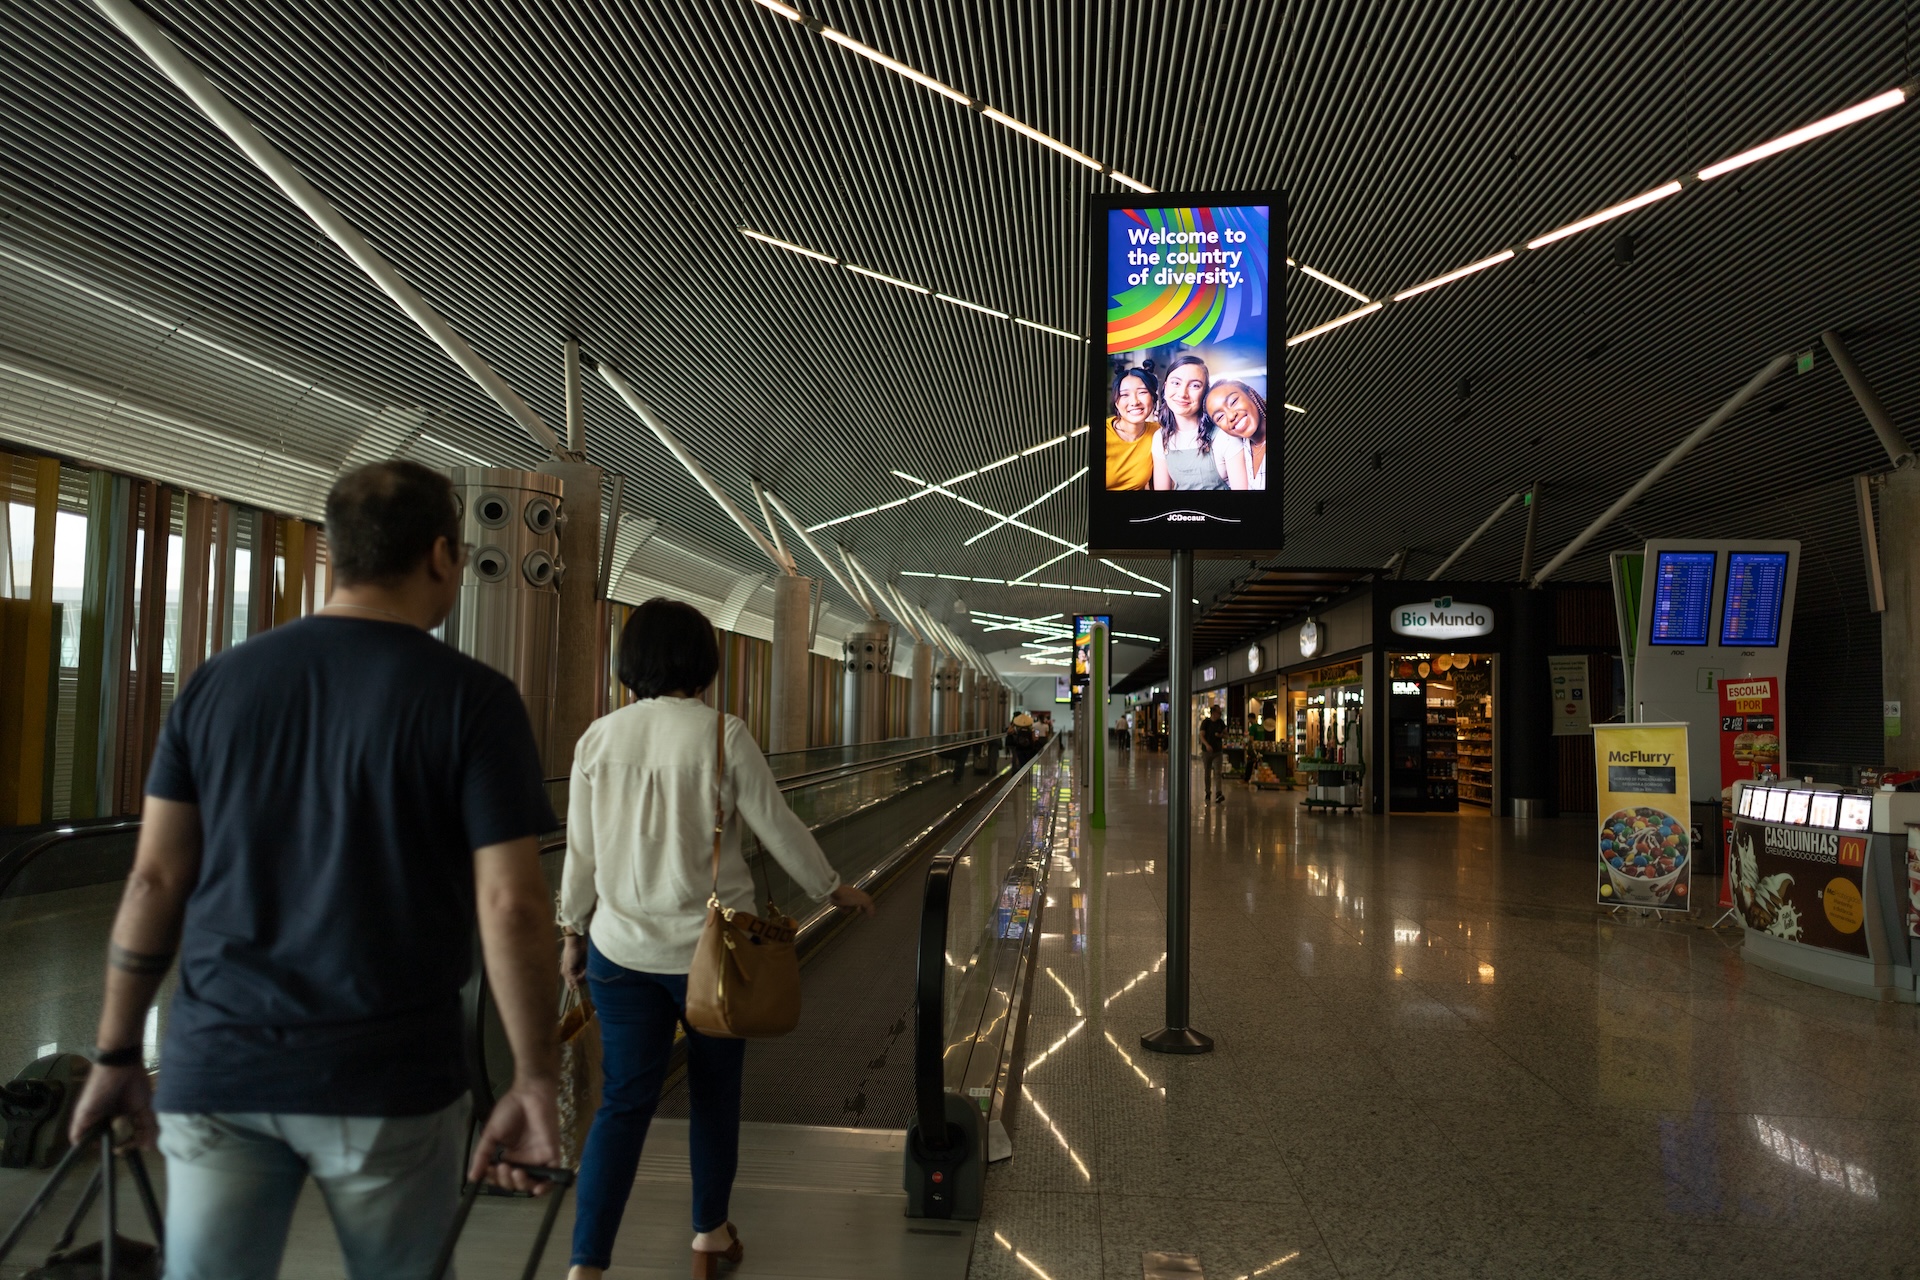 Welcome billboards for the G20 international delegations were installed at Brasilia International Airport. Photo: Audiovisual/G20 Brasil